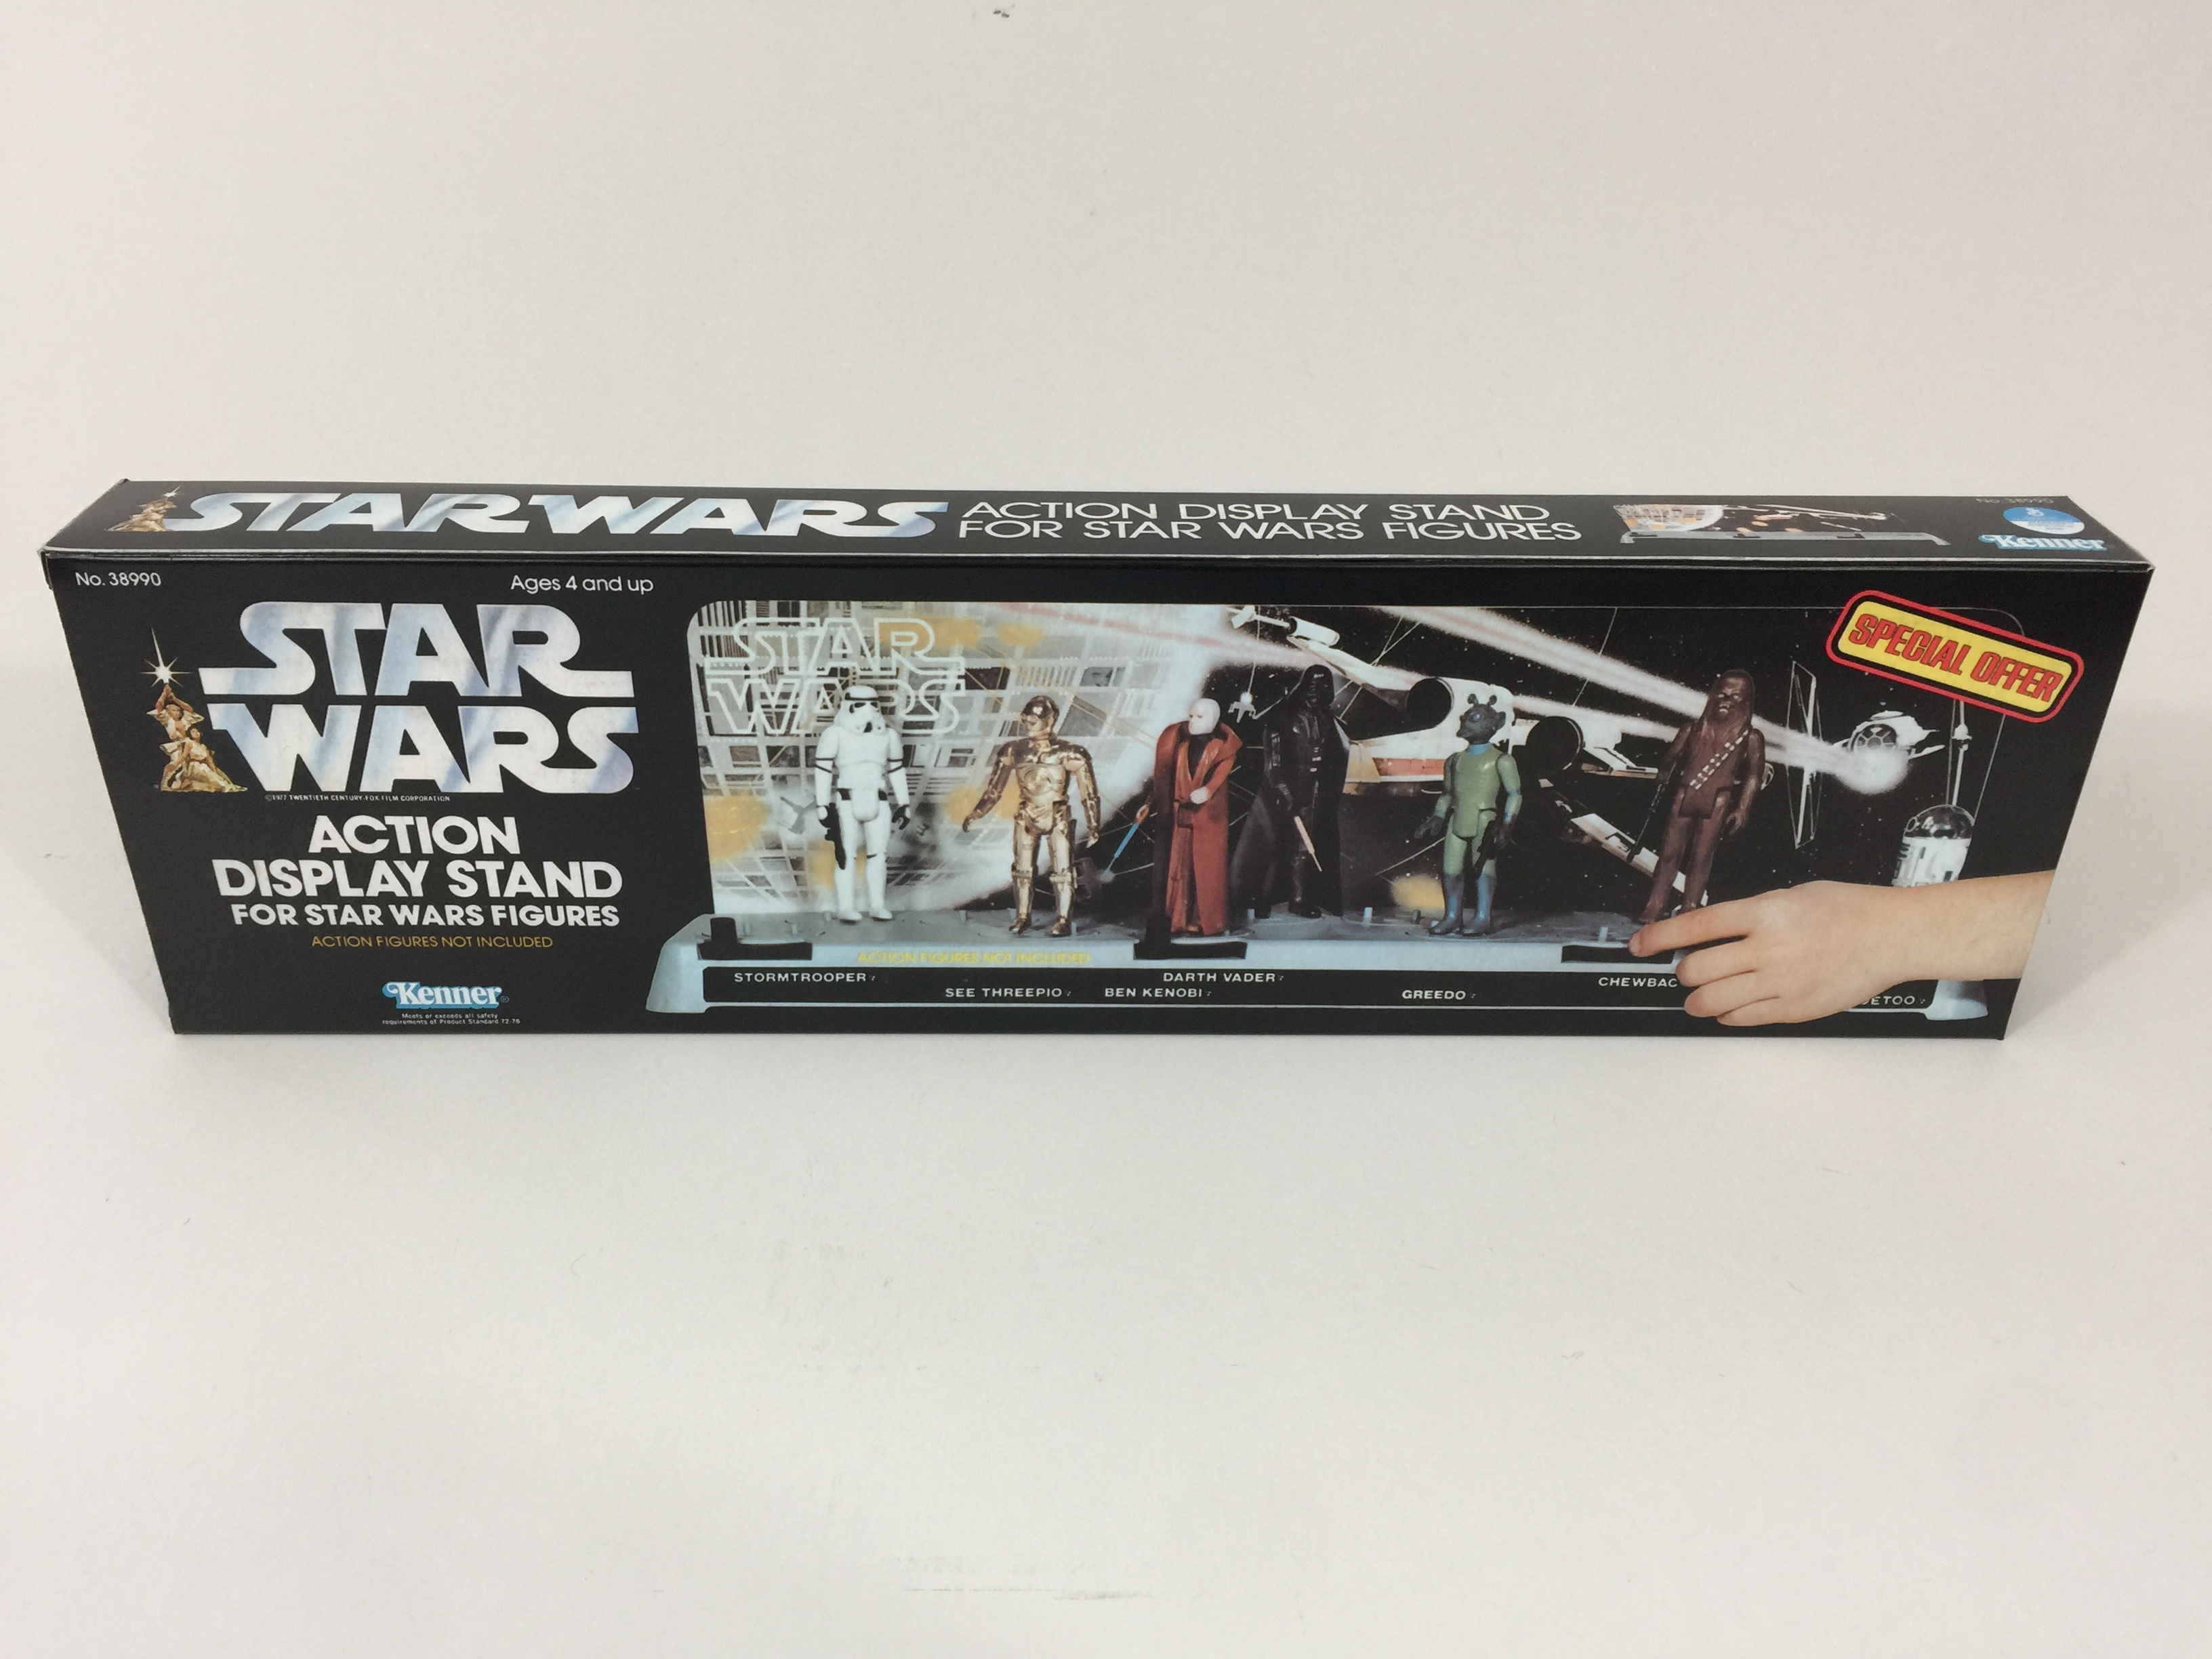  x50 Brand New Pro Display Stands for Vintage Star Wars 1977-1985 Action Figures